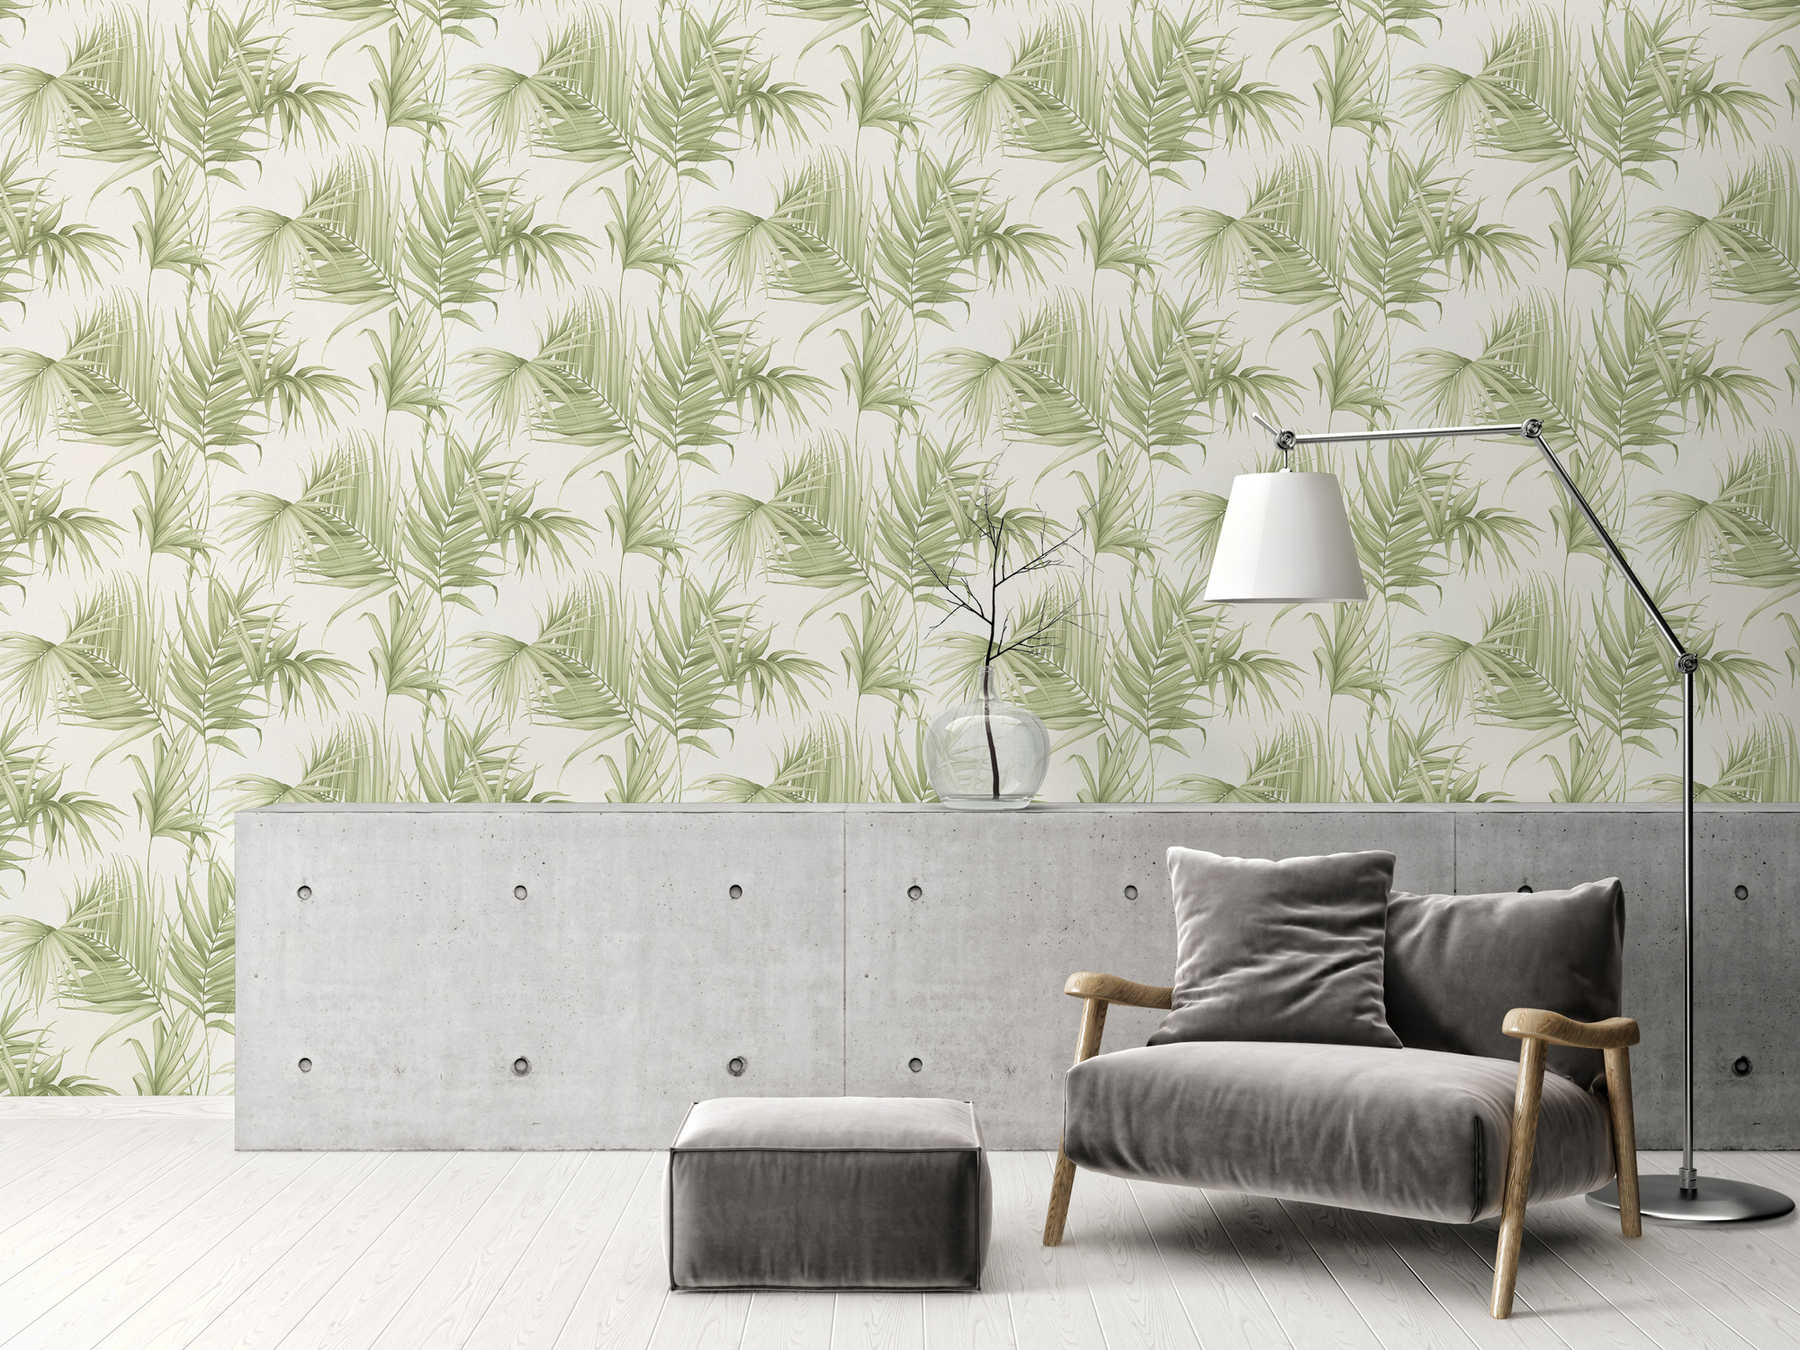             Leaves wallpaper with exotic fern leaves - green, white
        